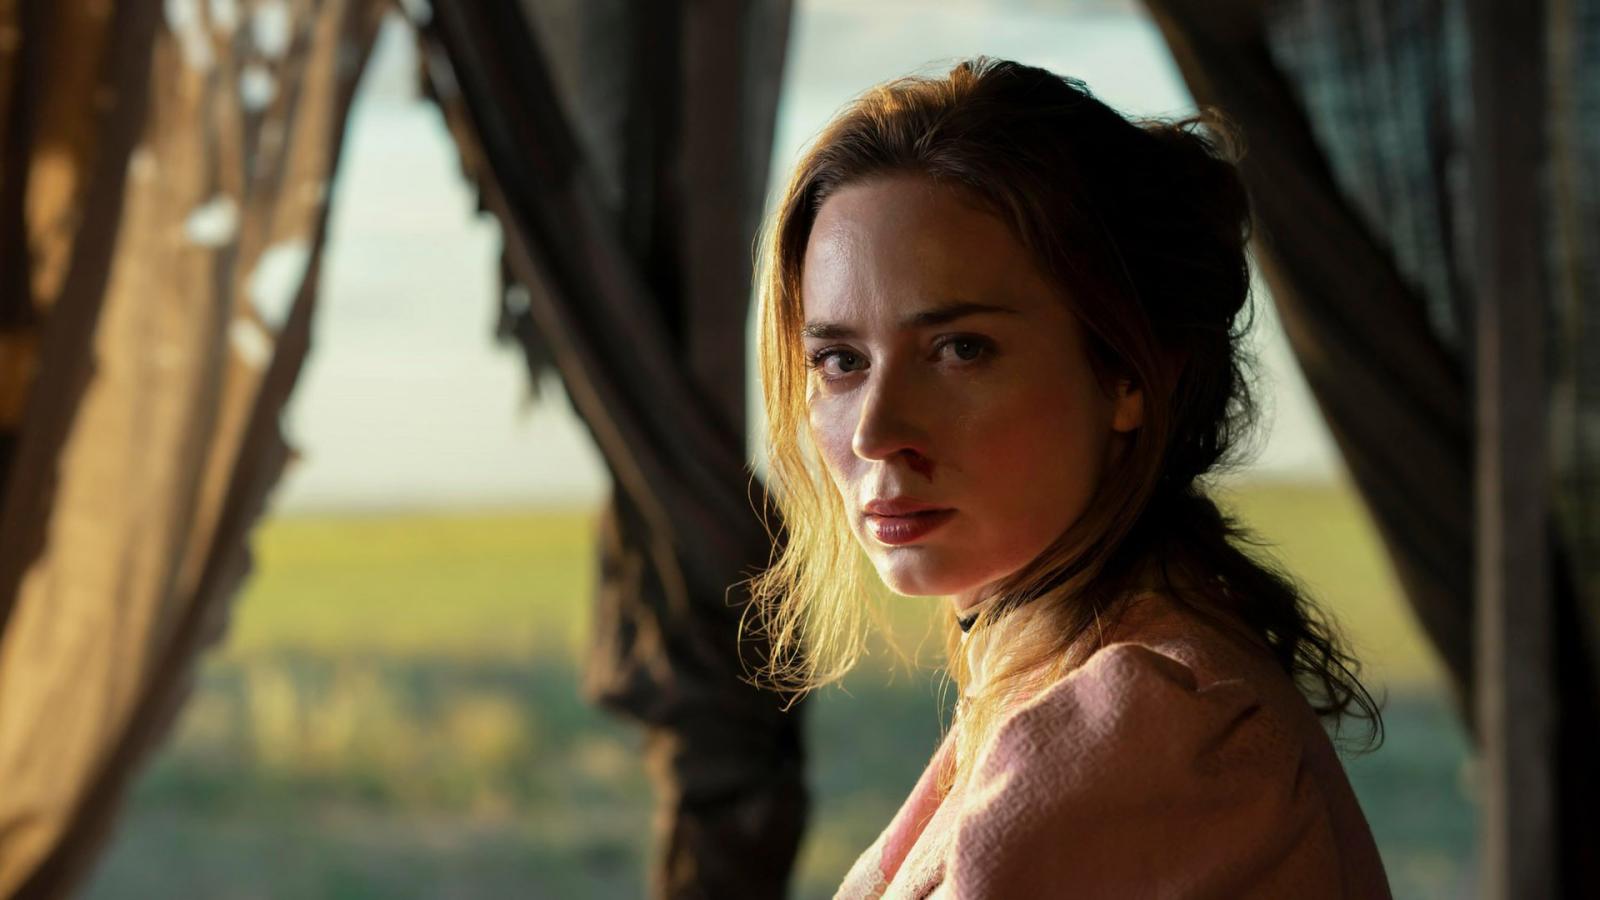 Looking For Your Next Binge? 6 Must-Watch Period Dramas, According to Reddit - image 1